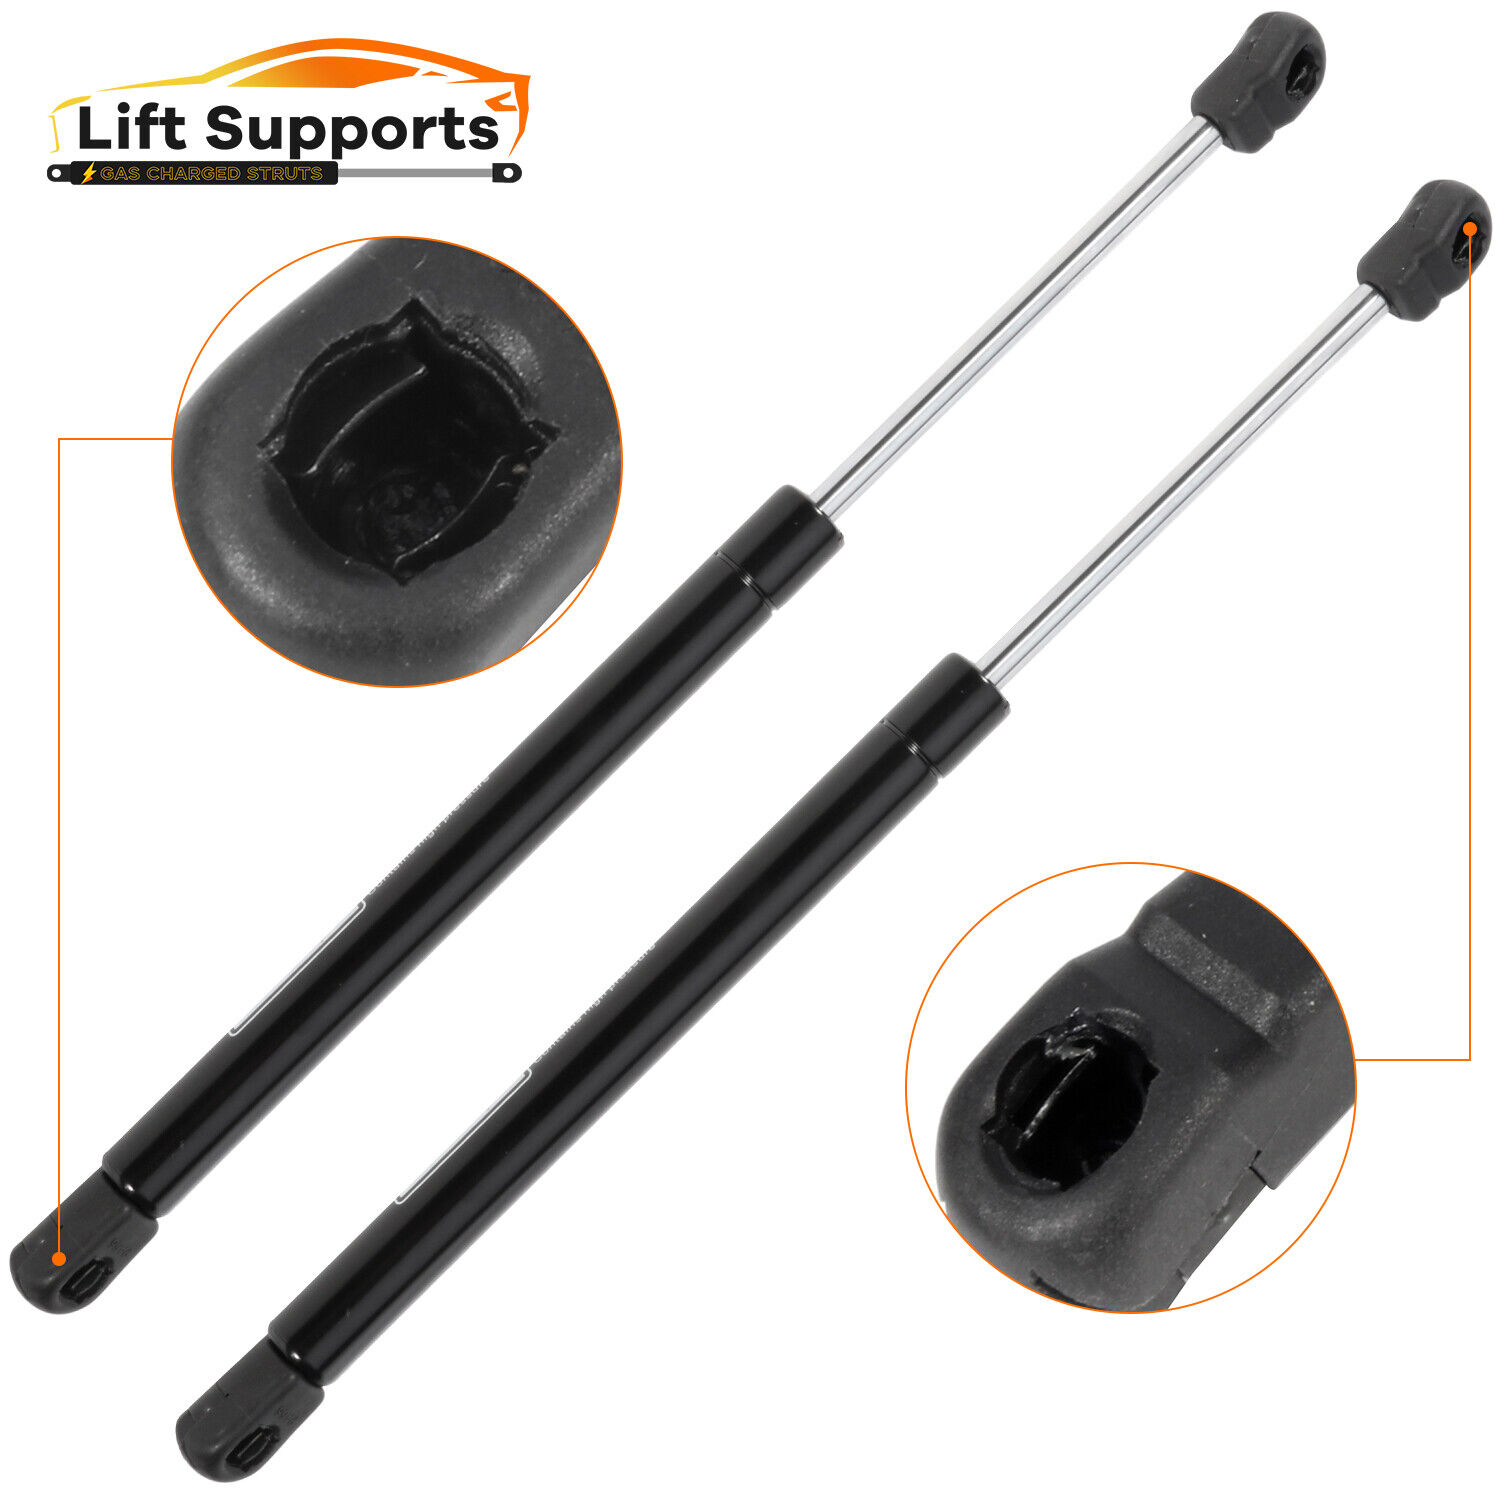 2Pcs Fits 2011-2020 Dodge Charger Front Hood Springs Lift Supports Struts Shocks